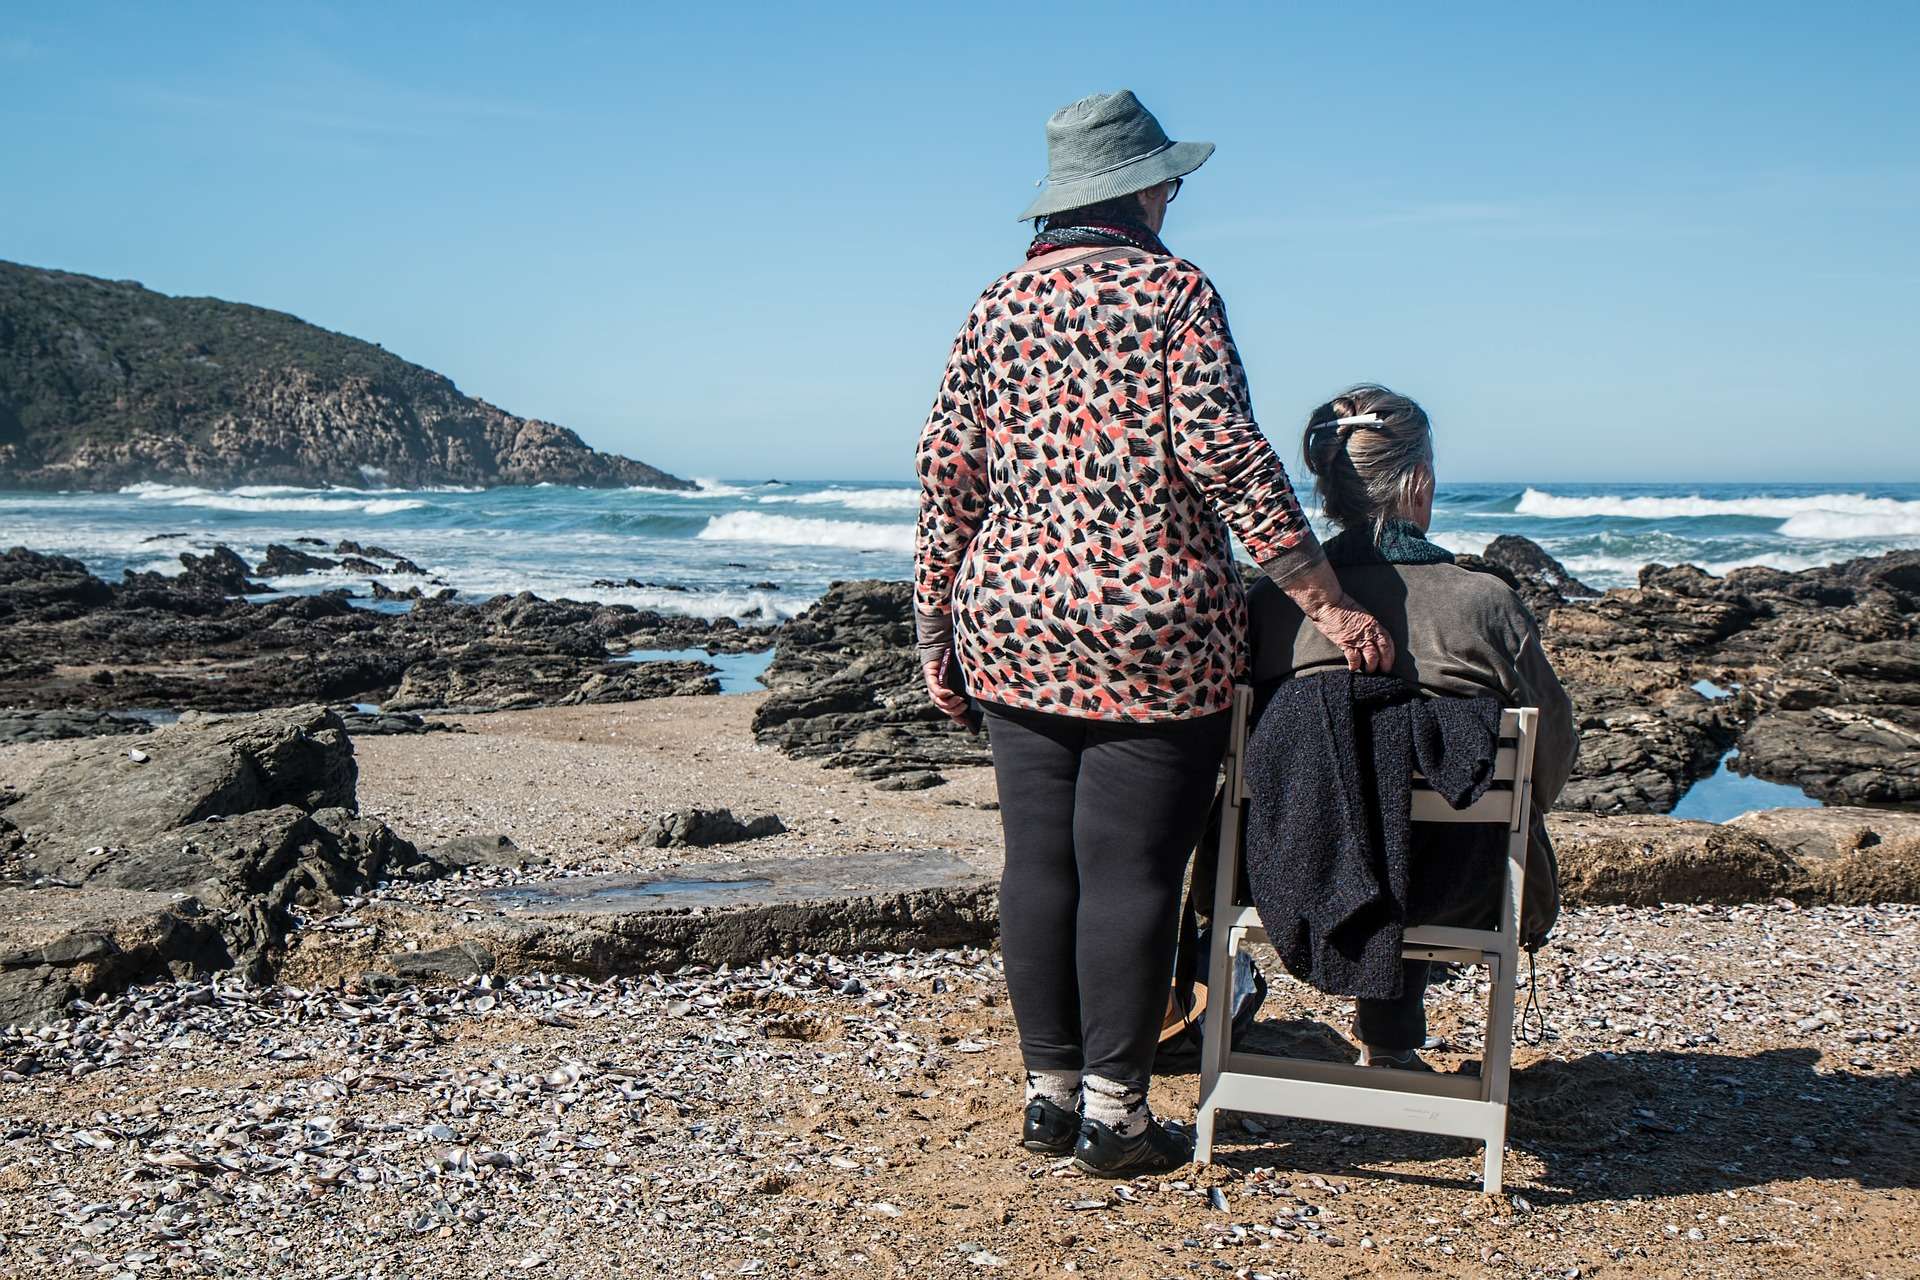 Two ladies sat together on a chair by the sea.